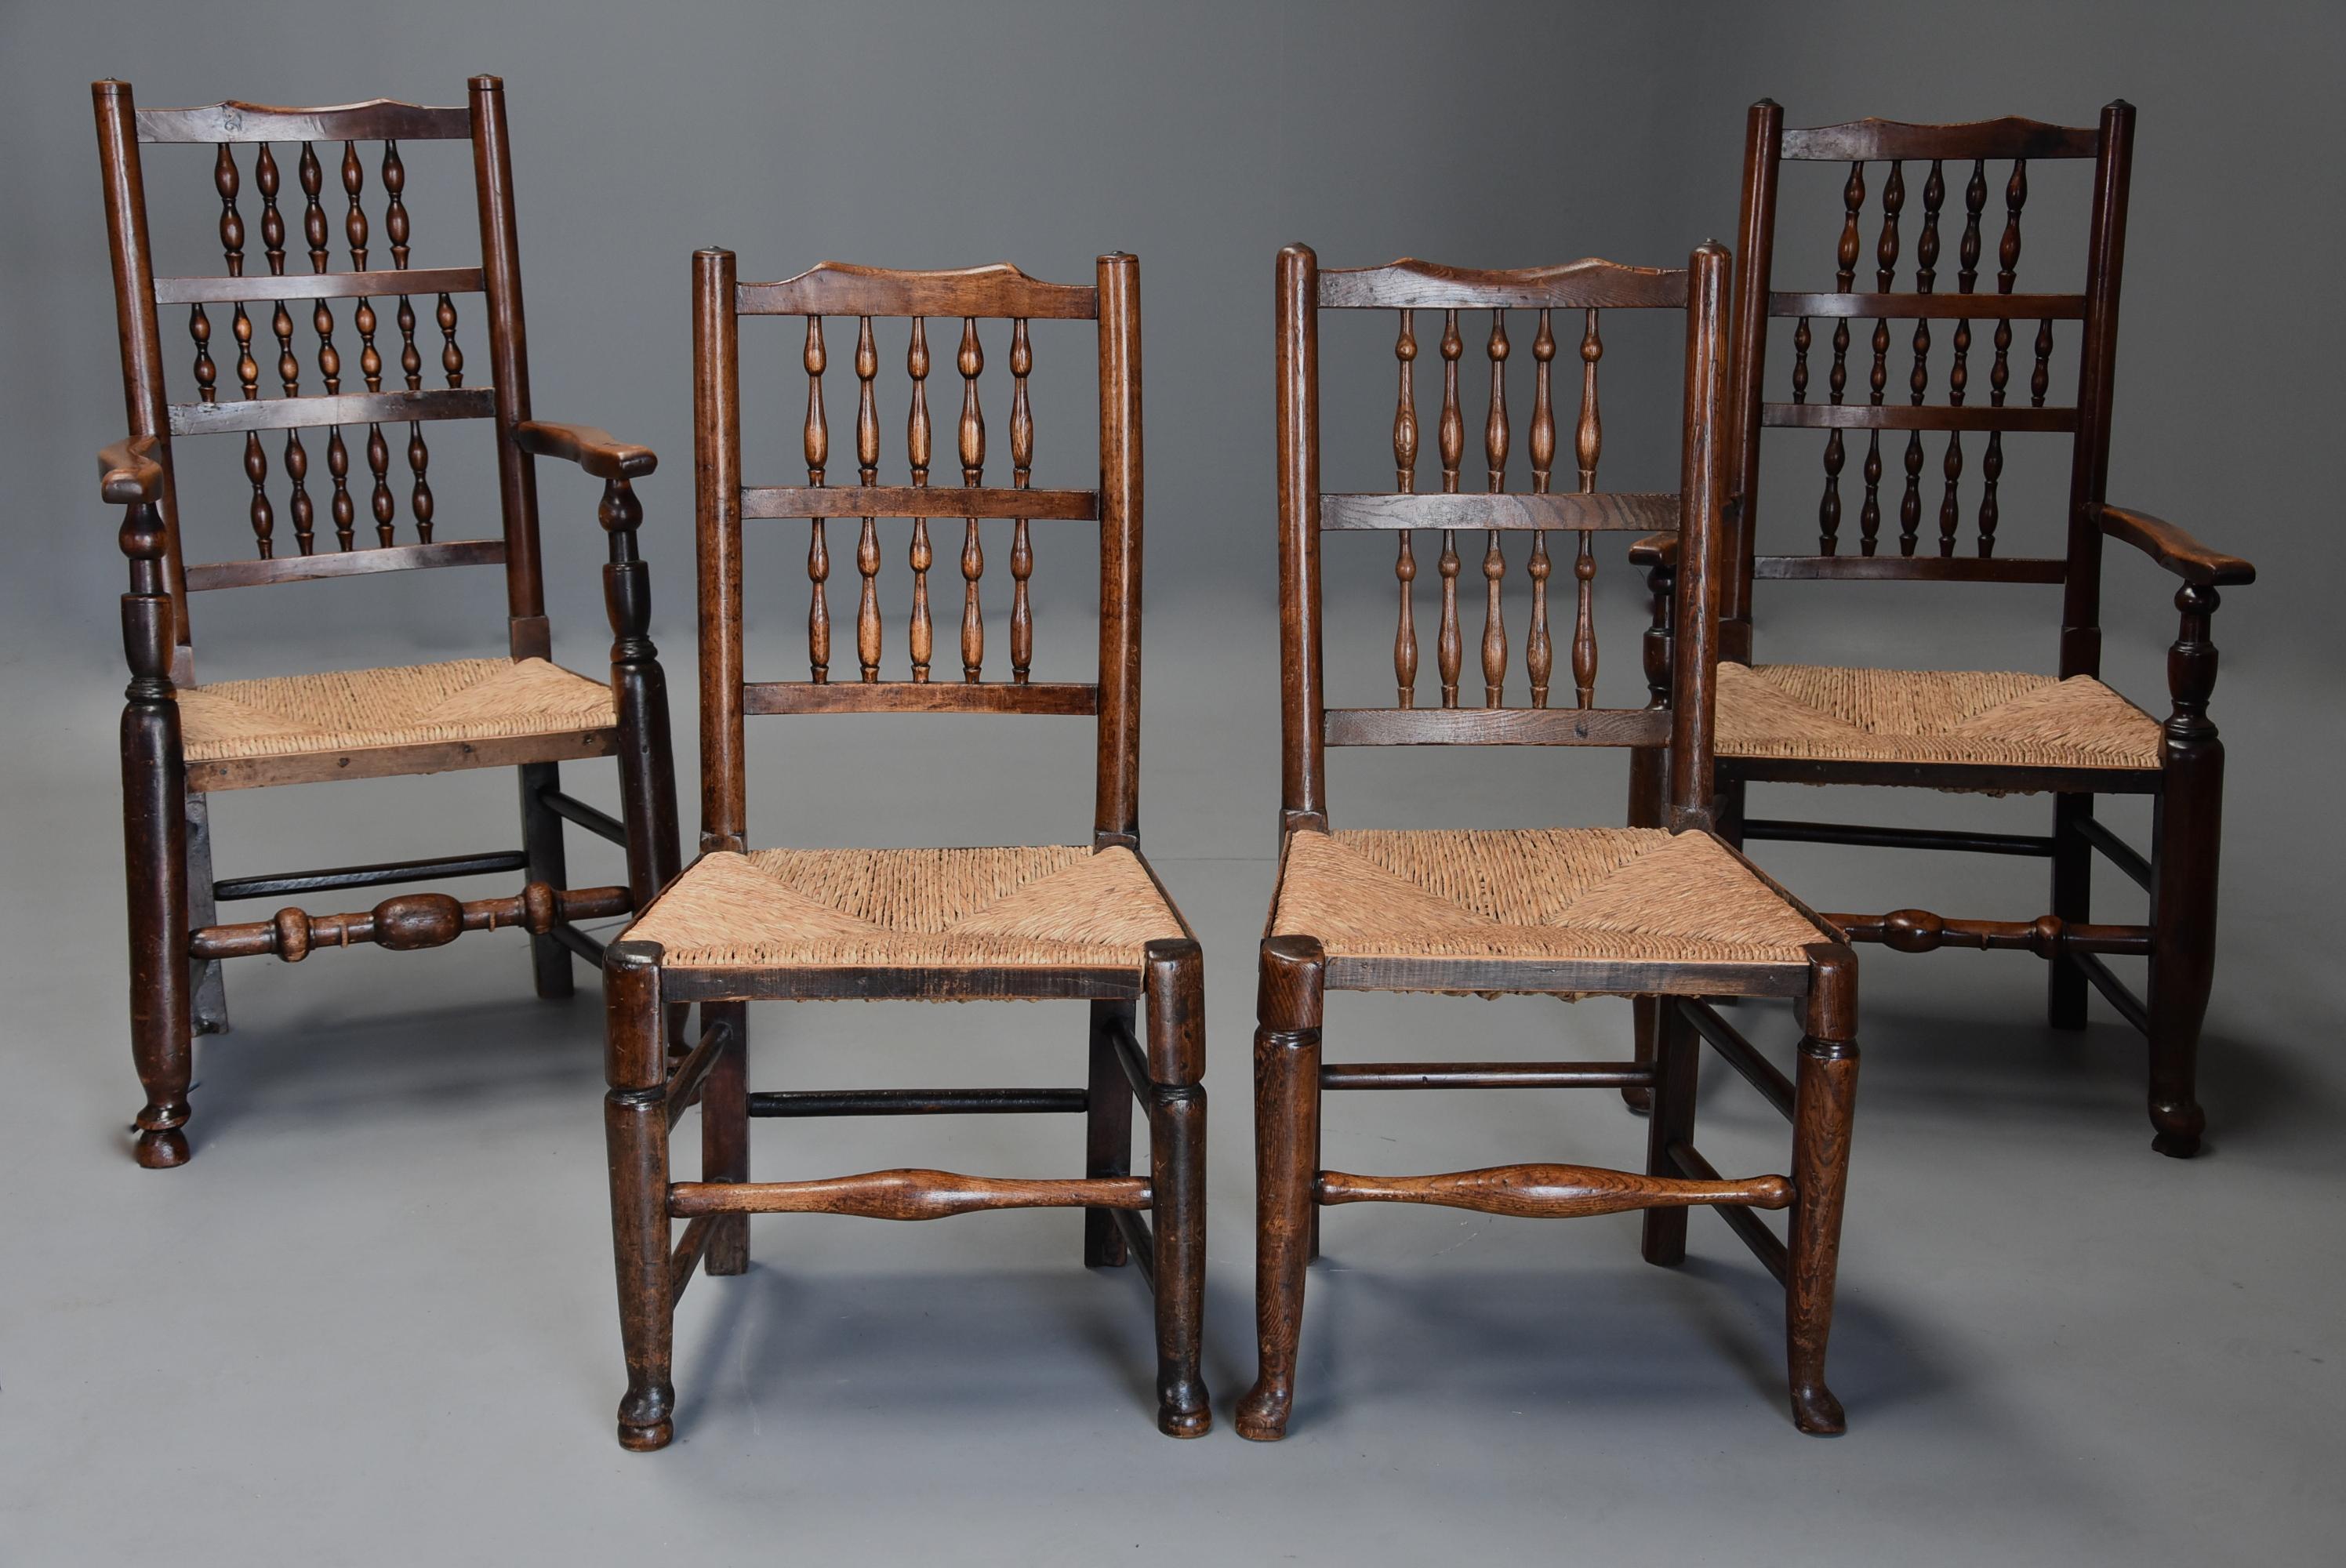 Matched Set of Eight Mid-19th Century Ash Spindle Back Chairs of Superb Patina In Good Condition For Sale In Suffolk, GB